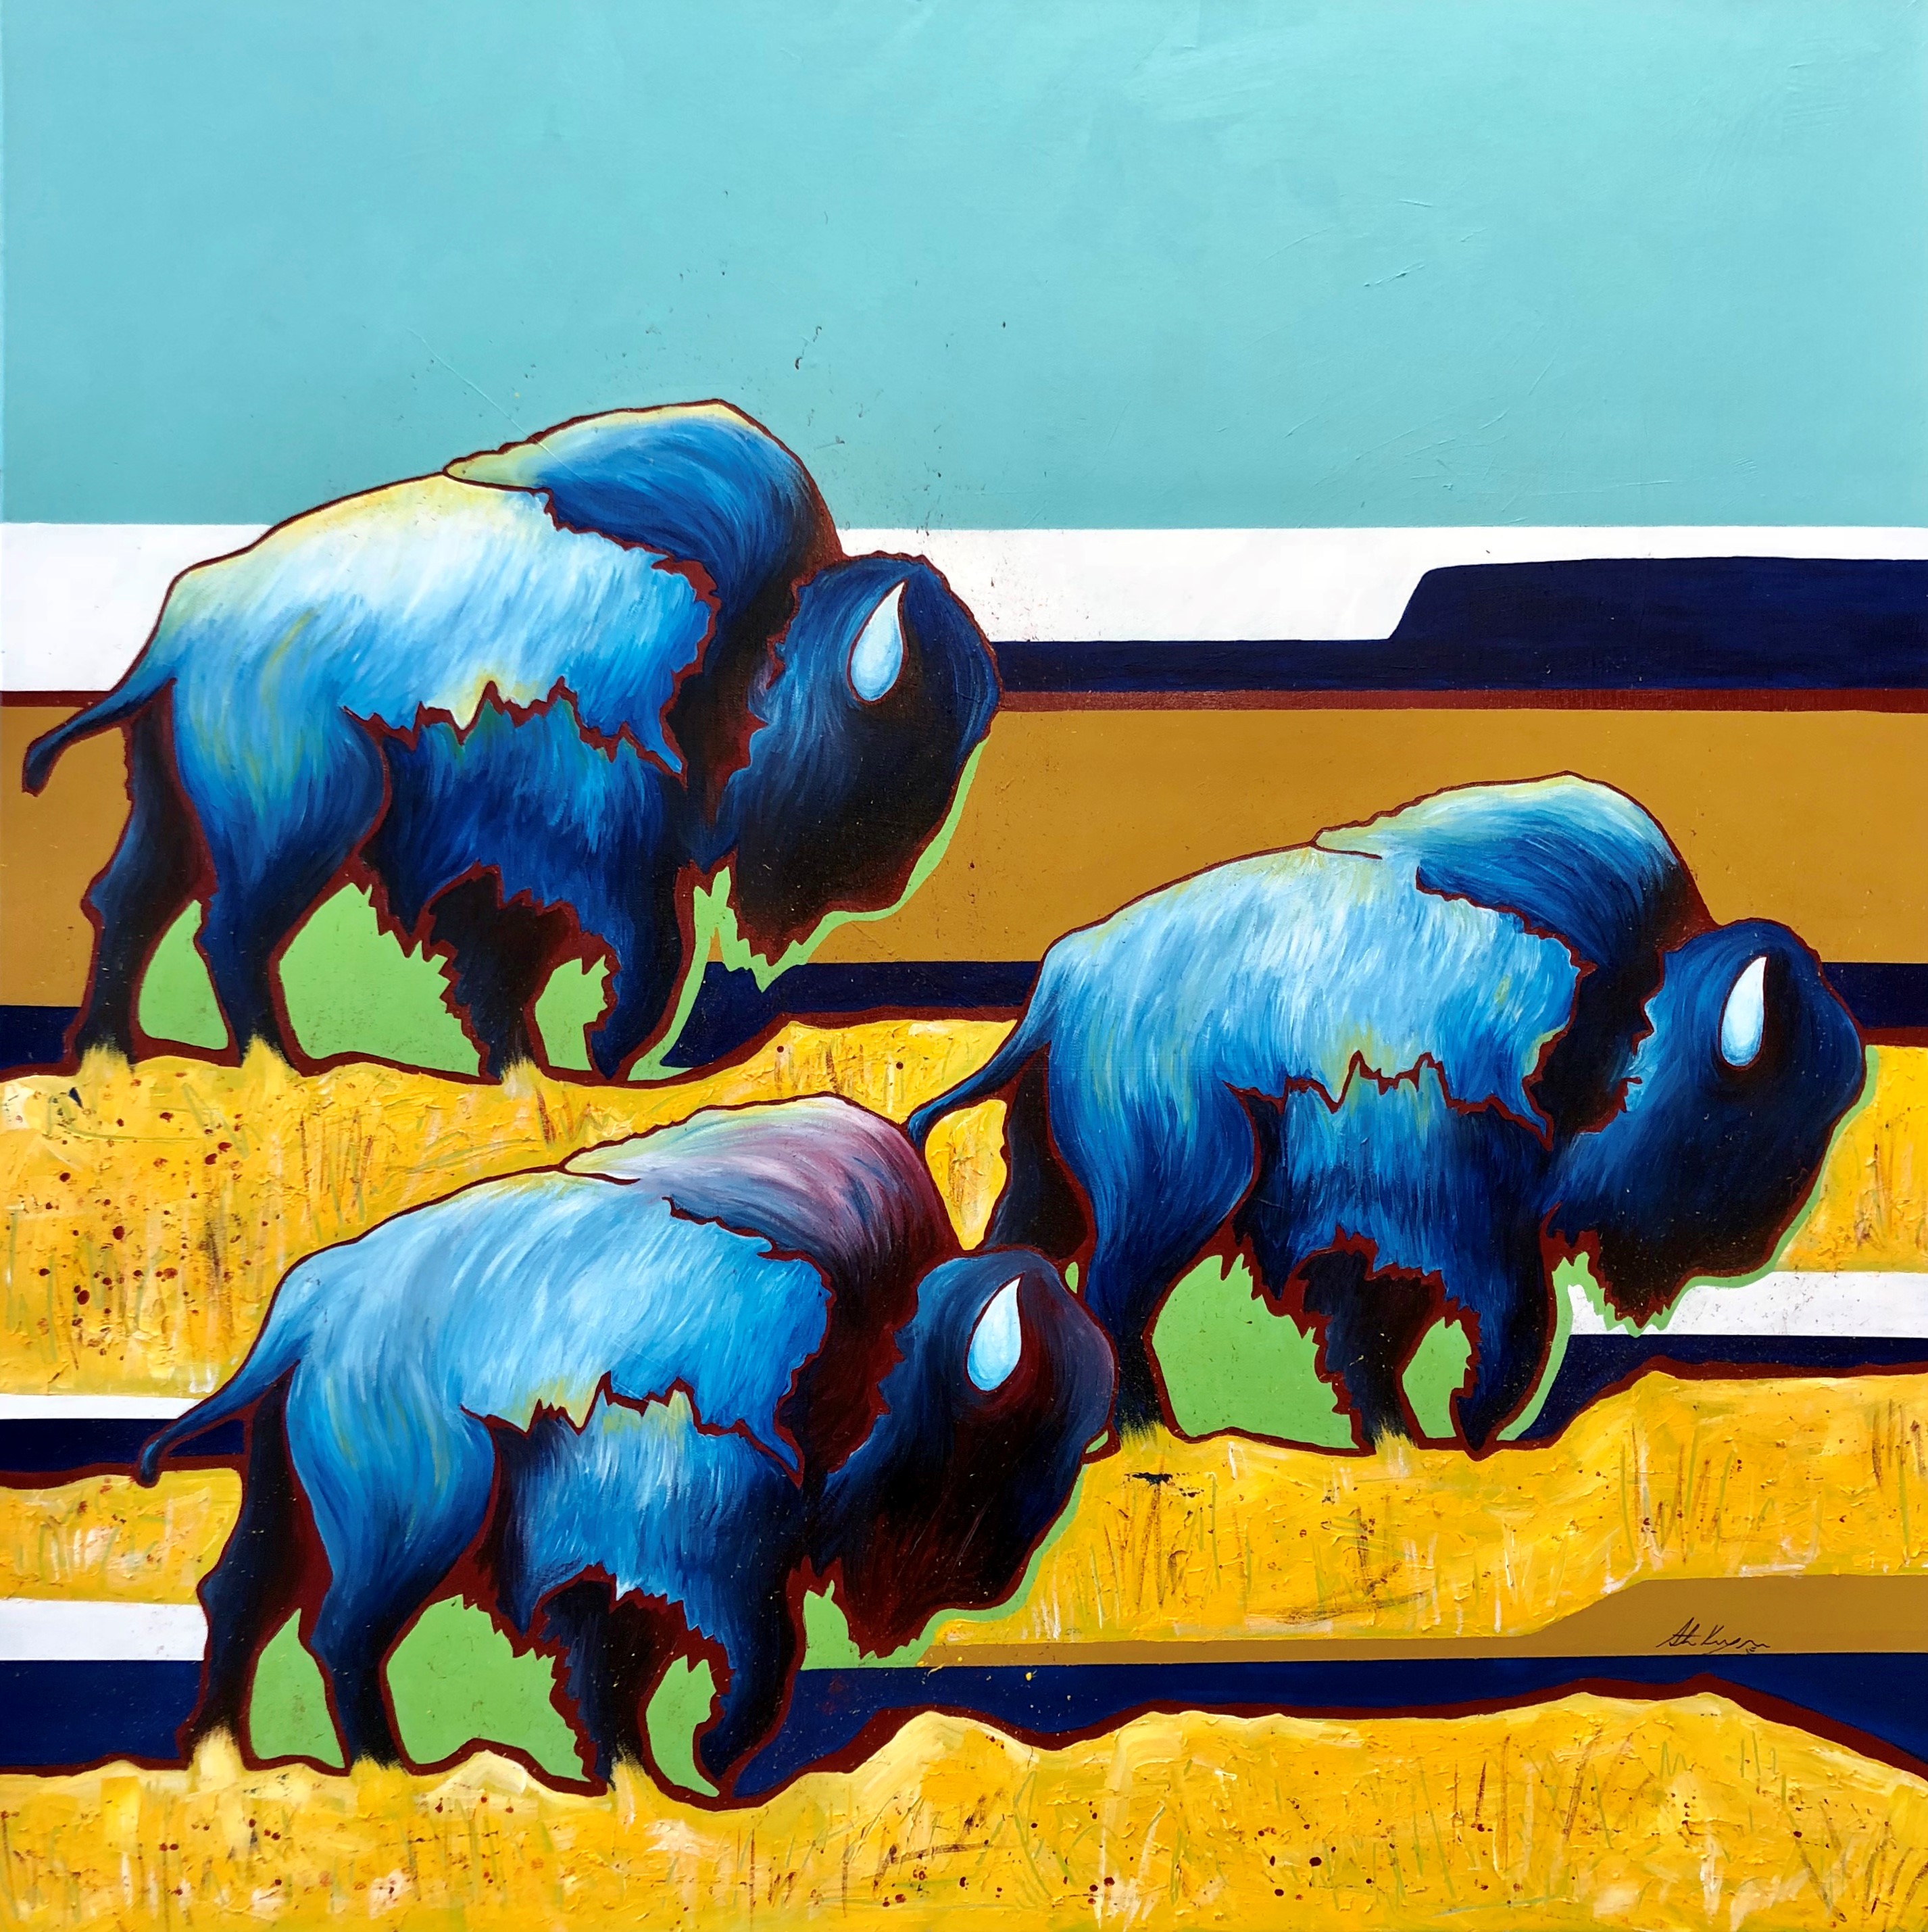 Artistic painting of bison on the prairie using blues and yellows.